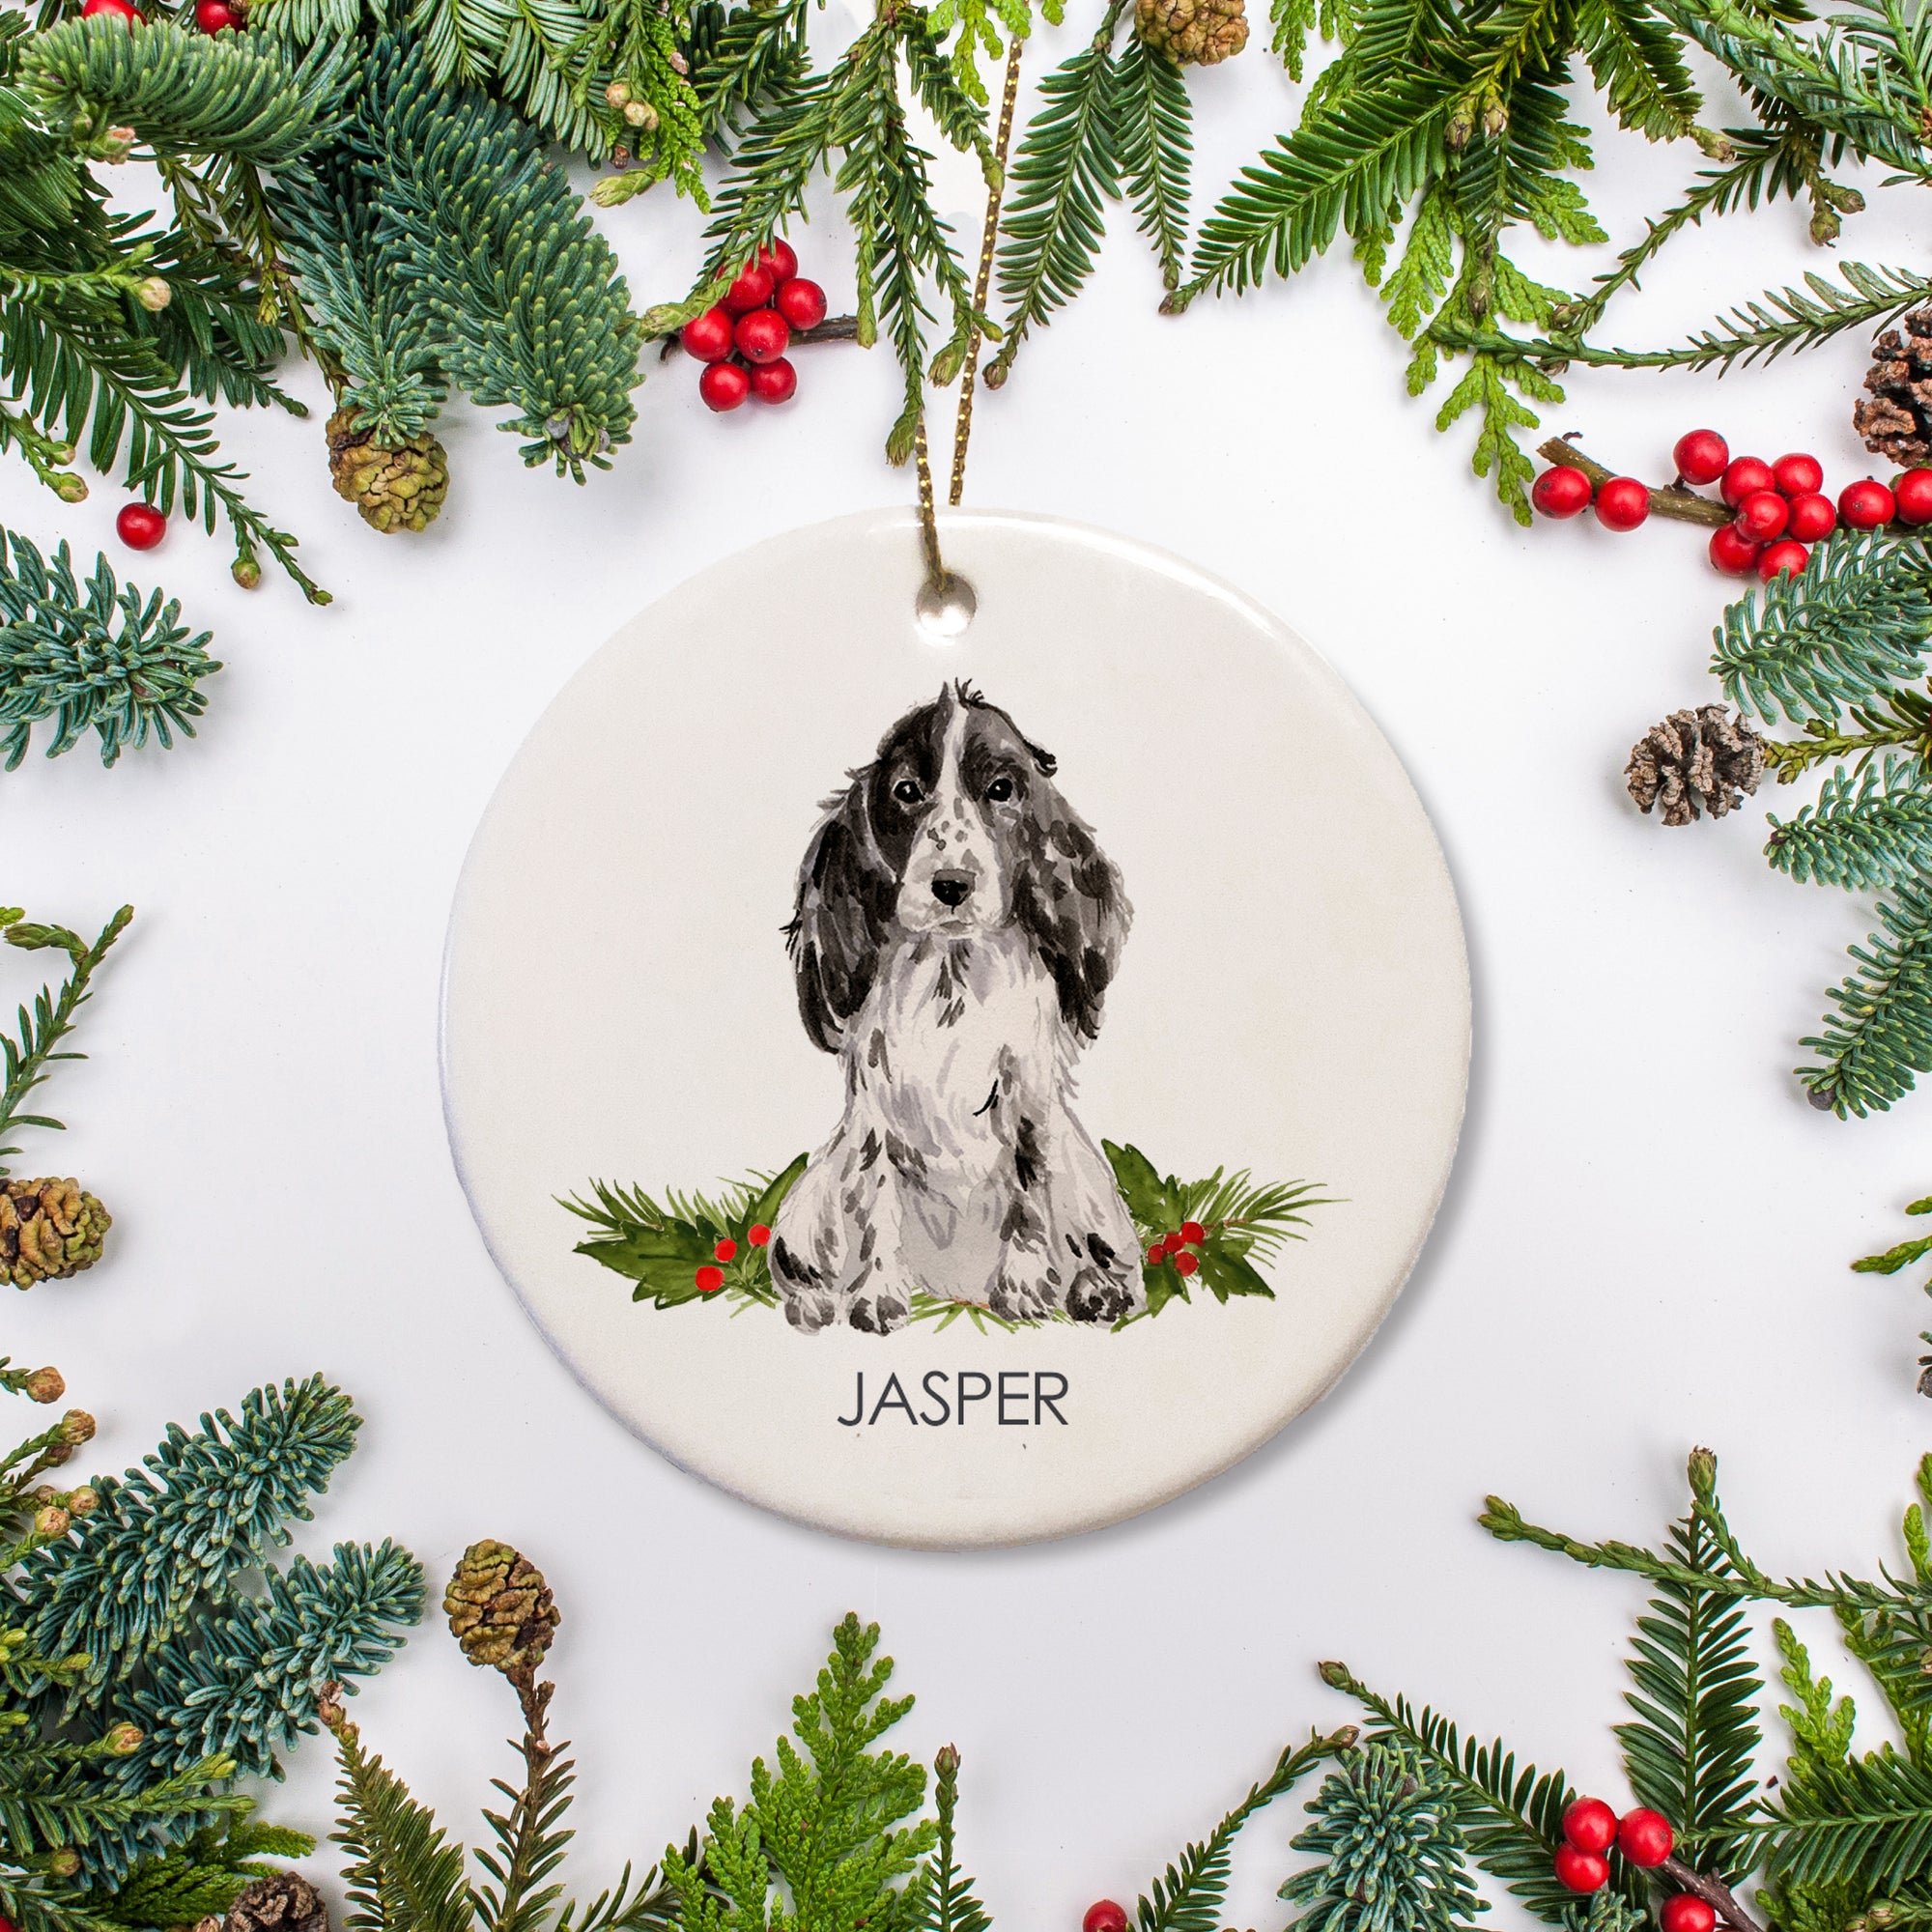 This personalized Christmas ornament features a black and white cocker spaniel, personalized with your dog's name. You can add a special message to the back of hte ornament, too. Makes a great gift!